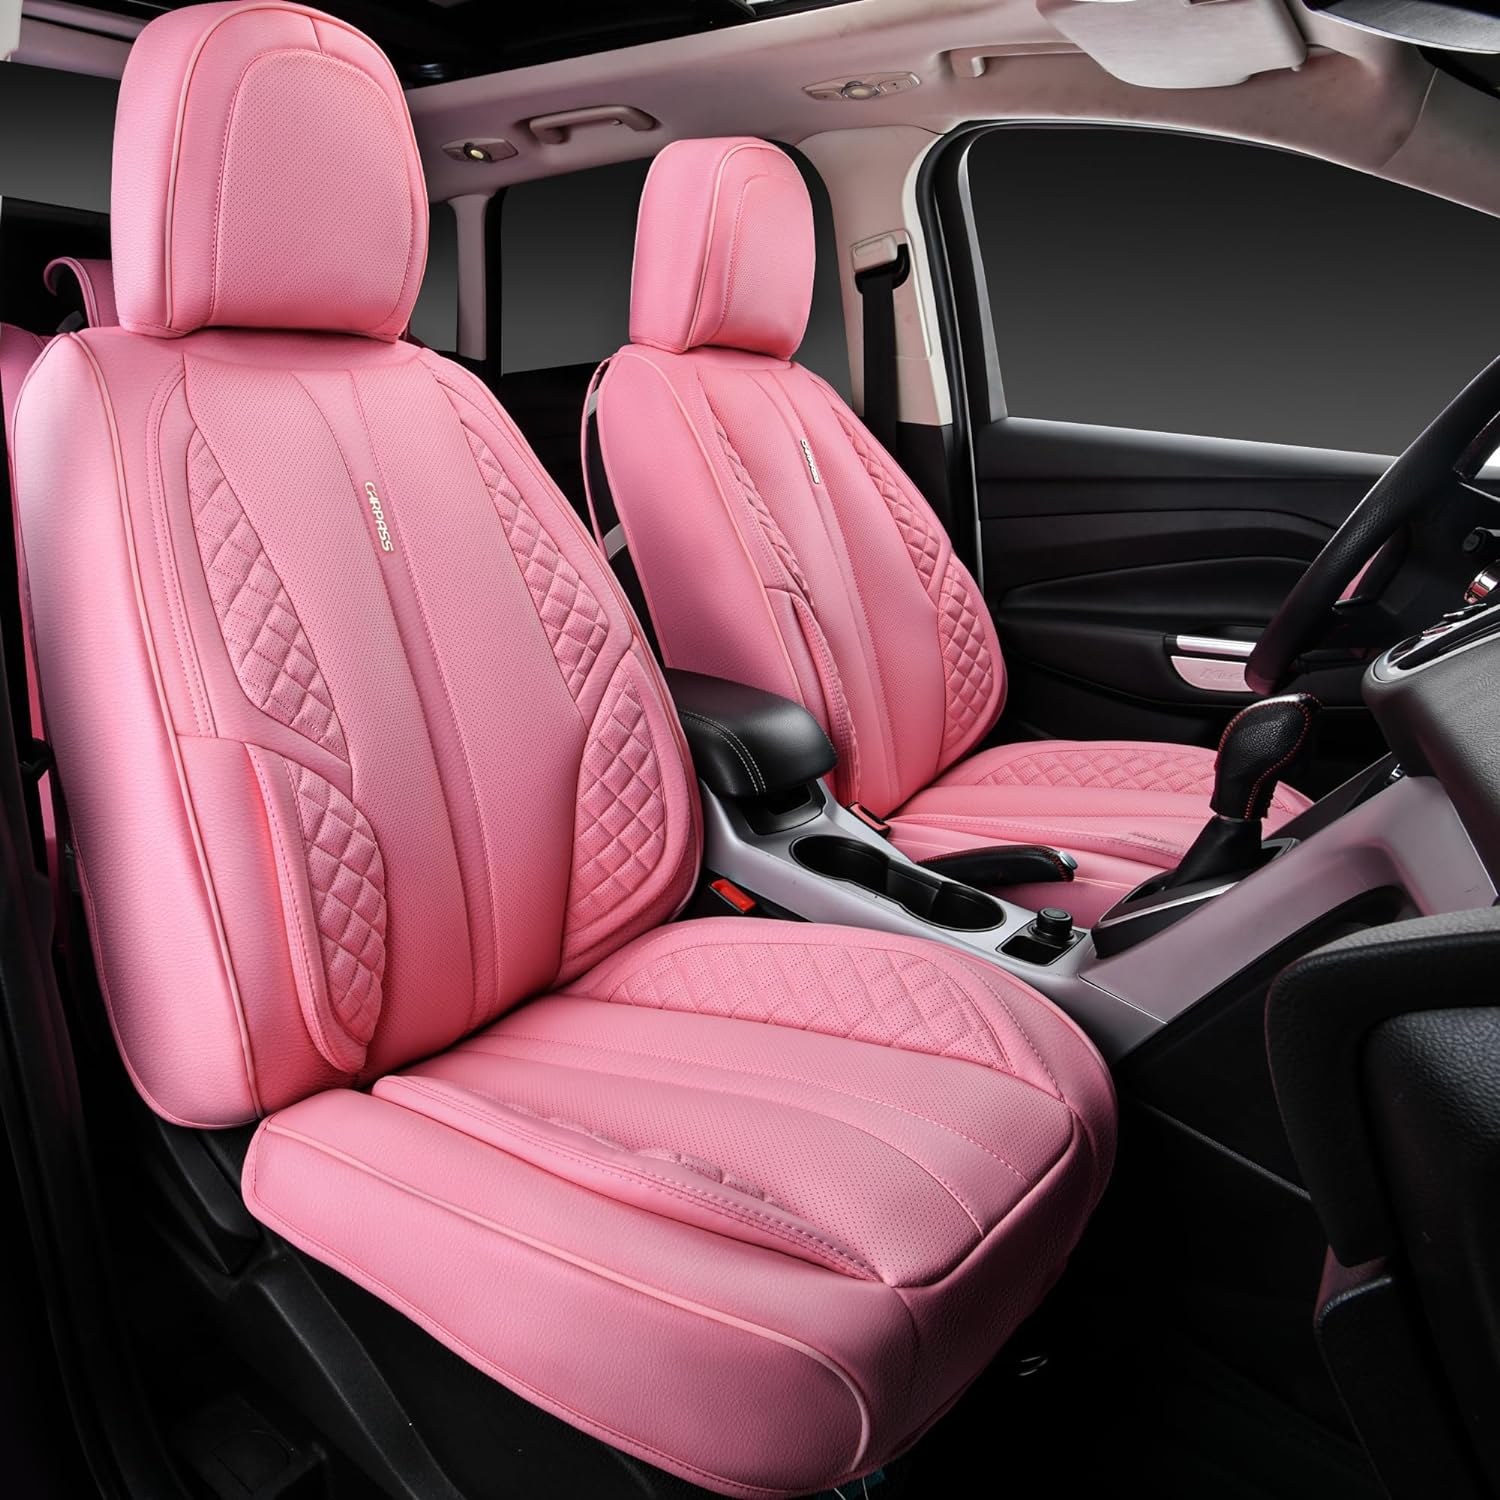 CAR PASS Barbie Pink Nappa Waterproof Leather Car Seat Covers Full Sets Cushion Breathable Protector Universal Fit for Car Sedan SUV Pickup Truck